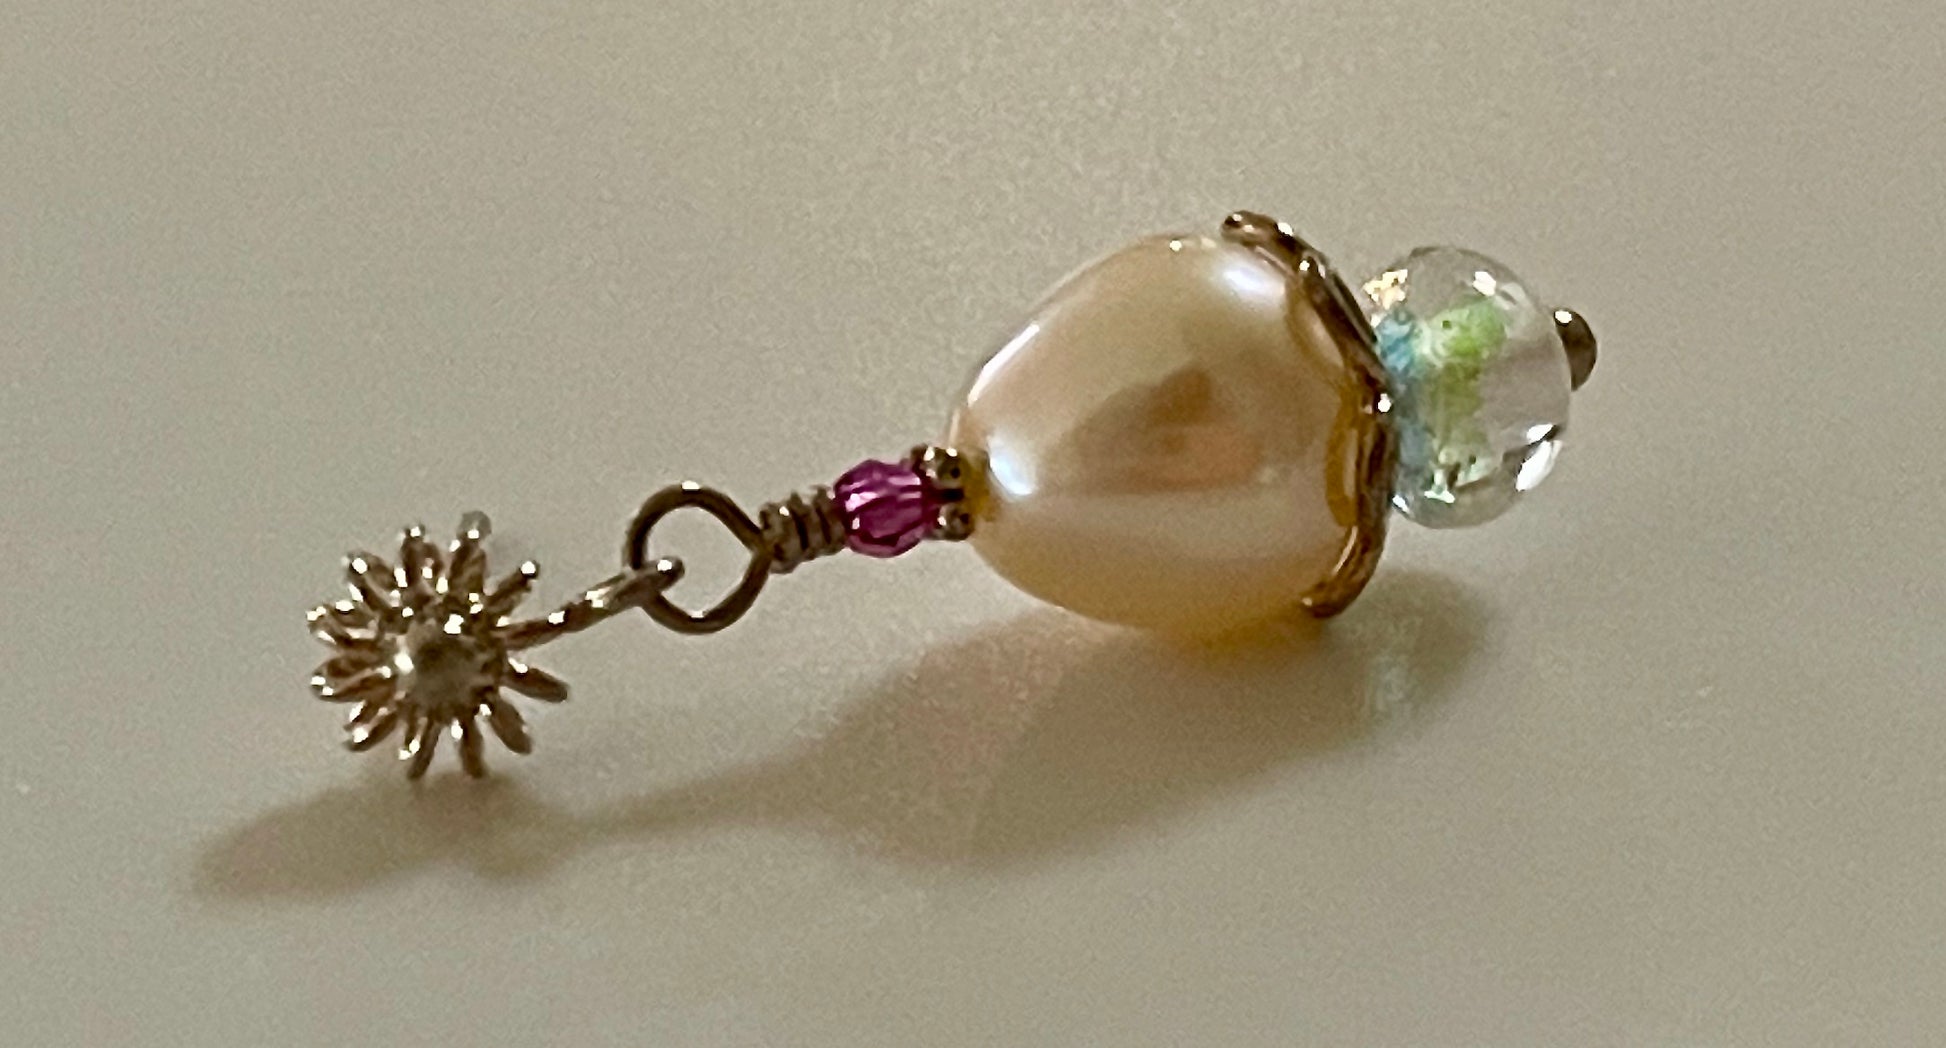 A single earring in the pair 